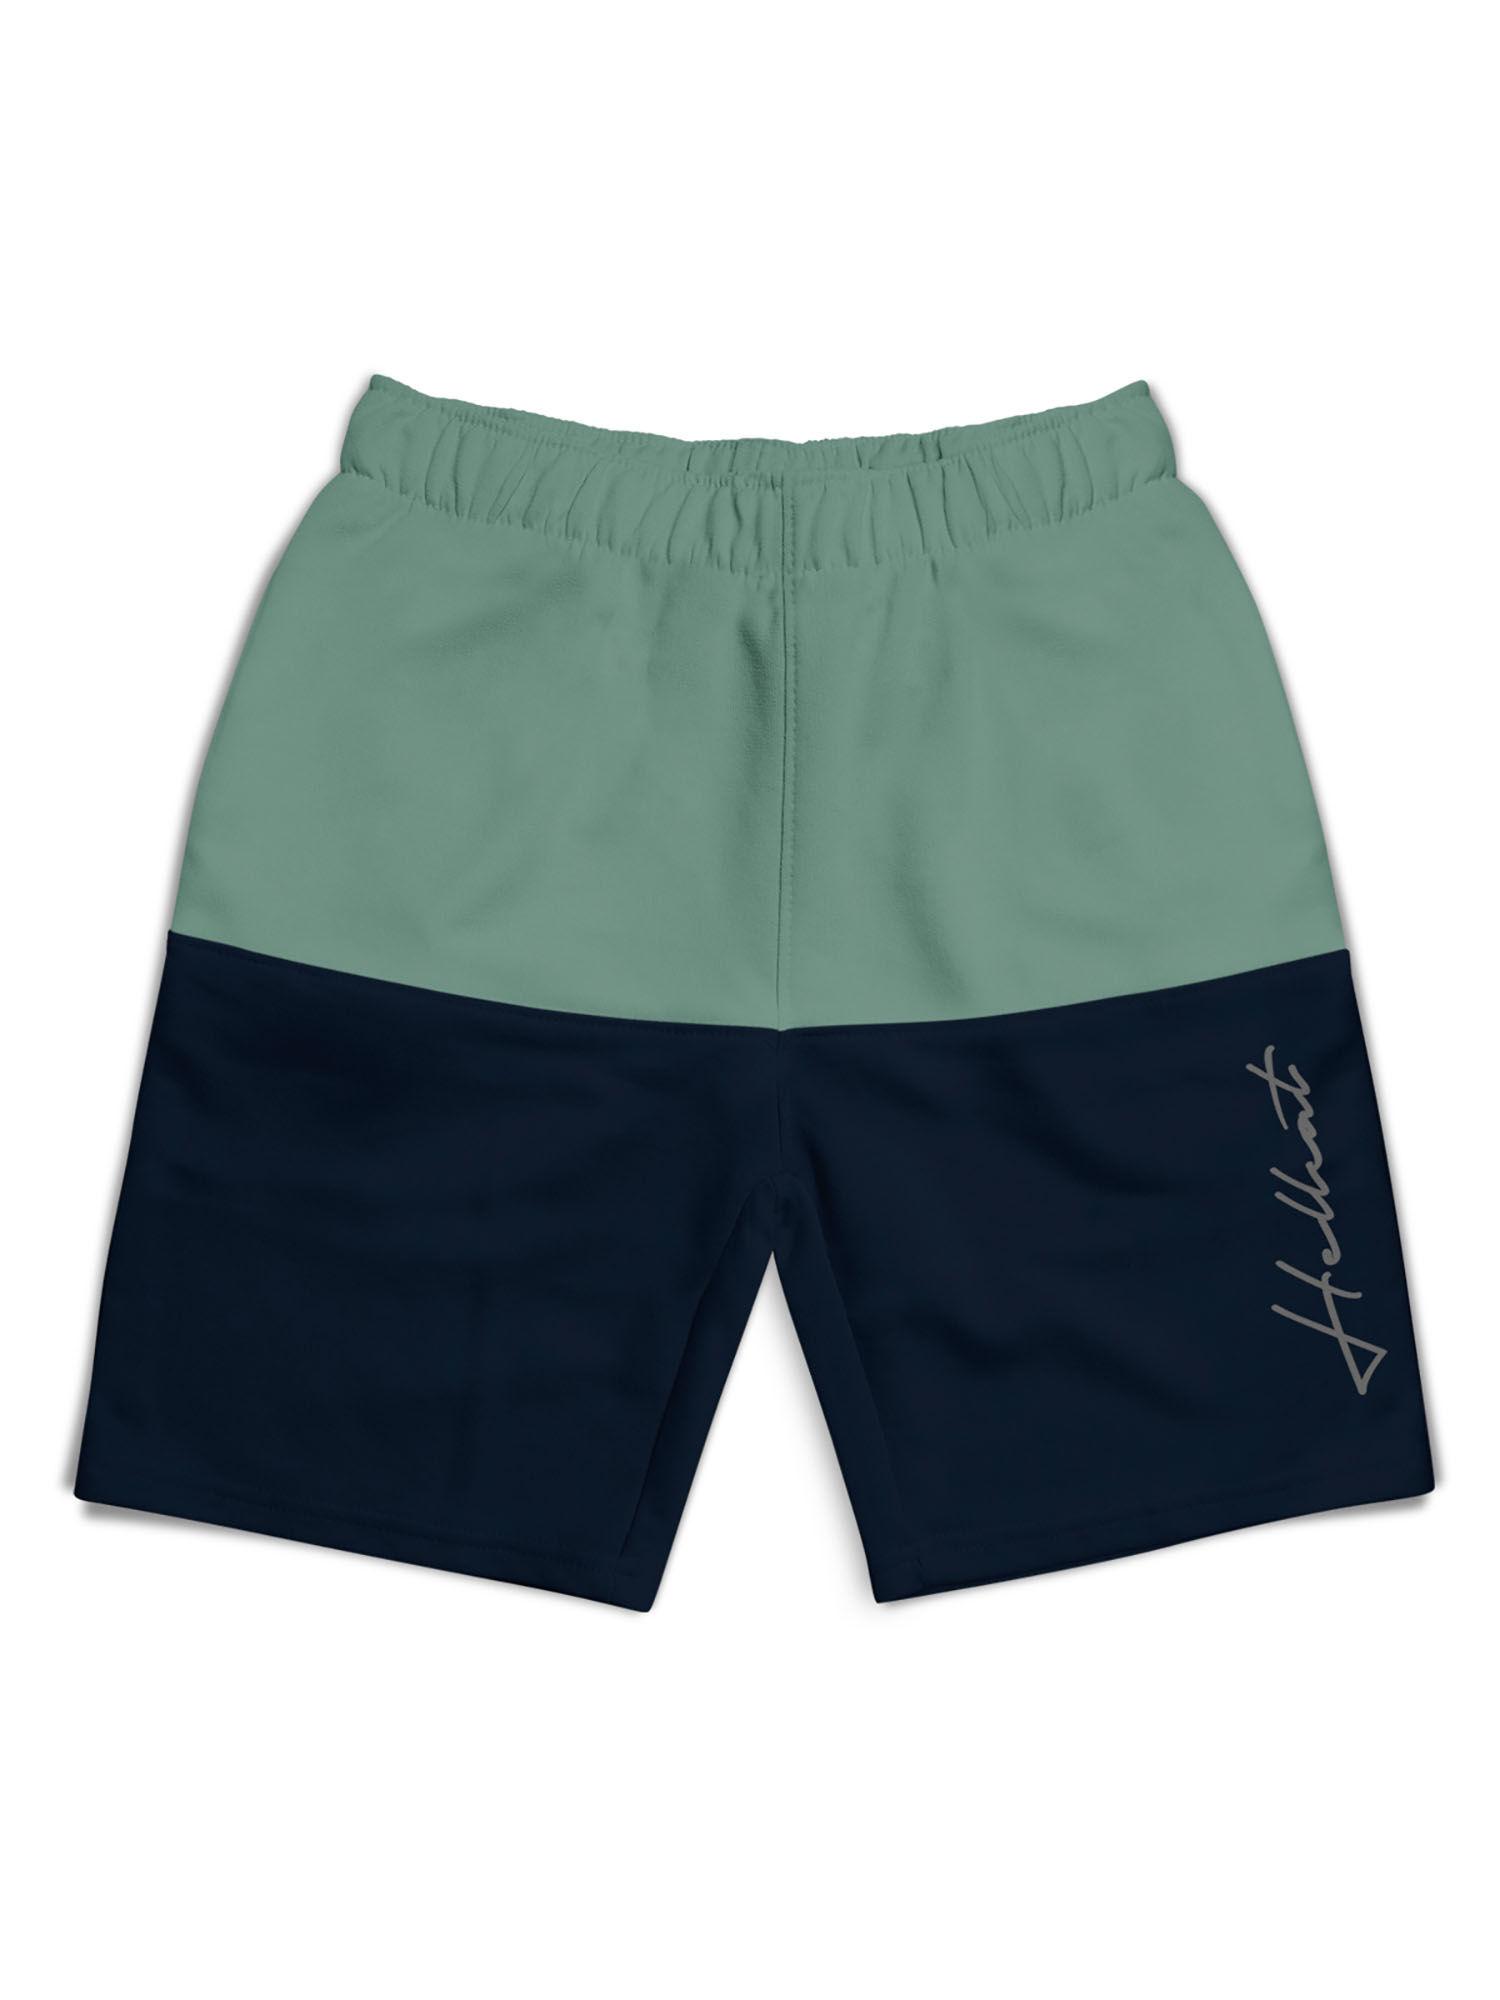 sea-green-colorblocked-mid-rise-shorts-for-boys